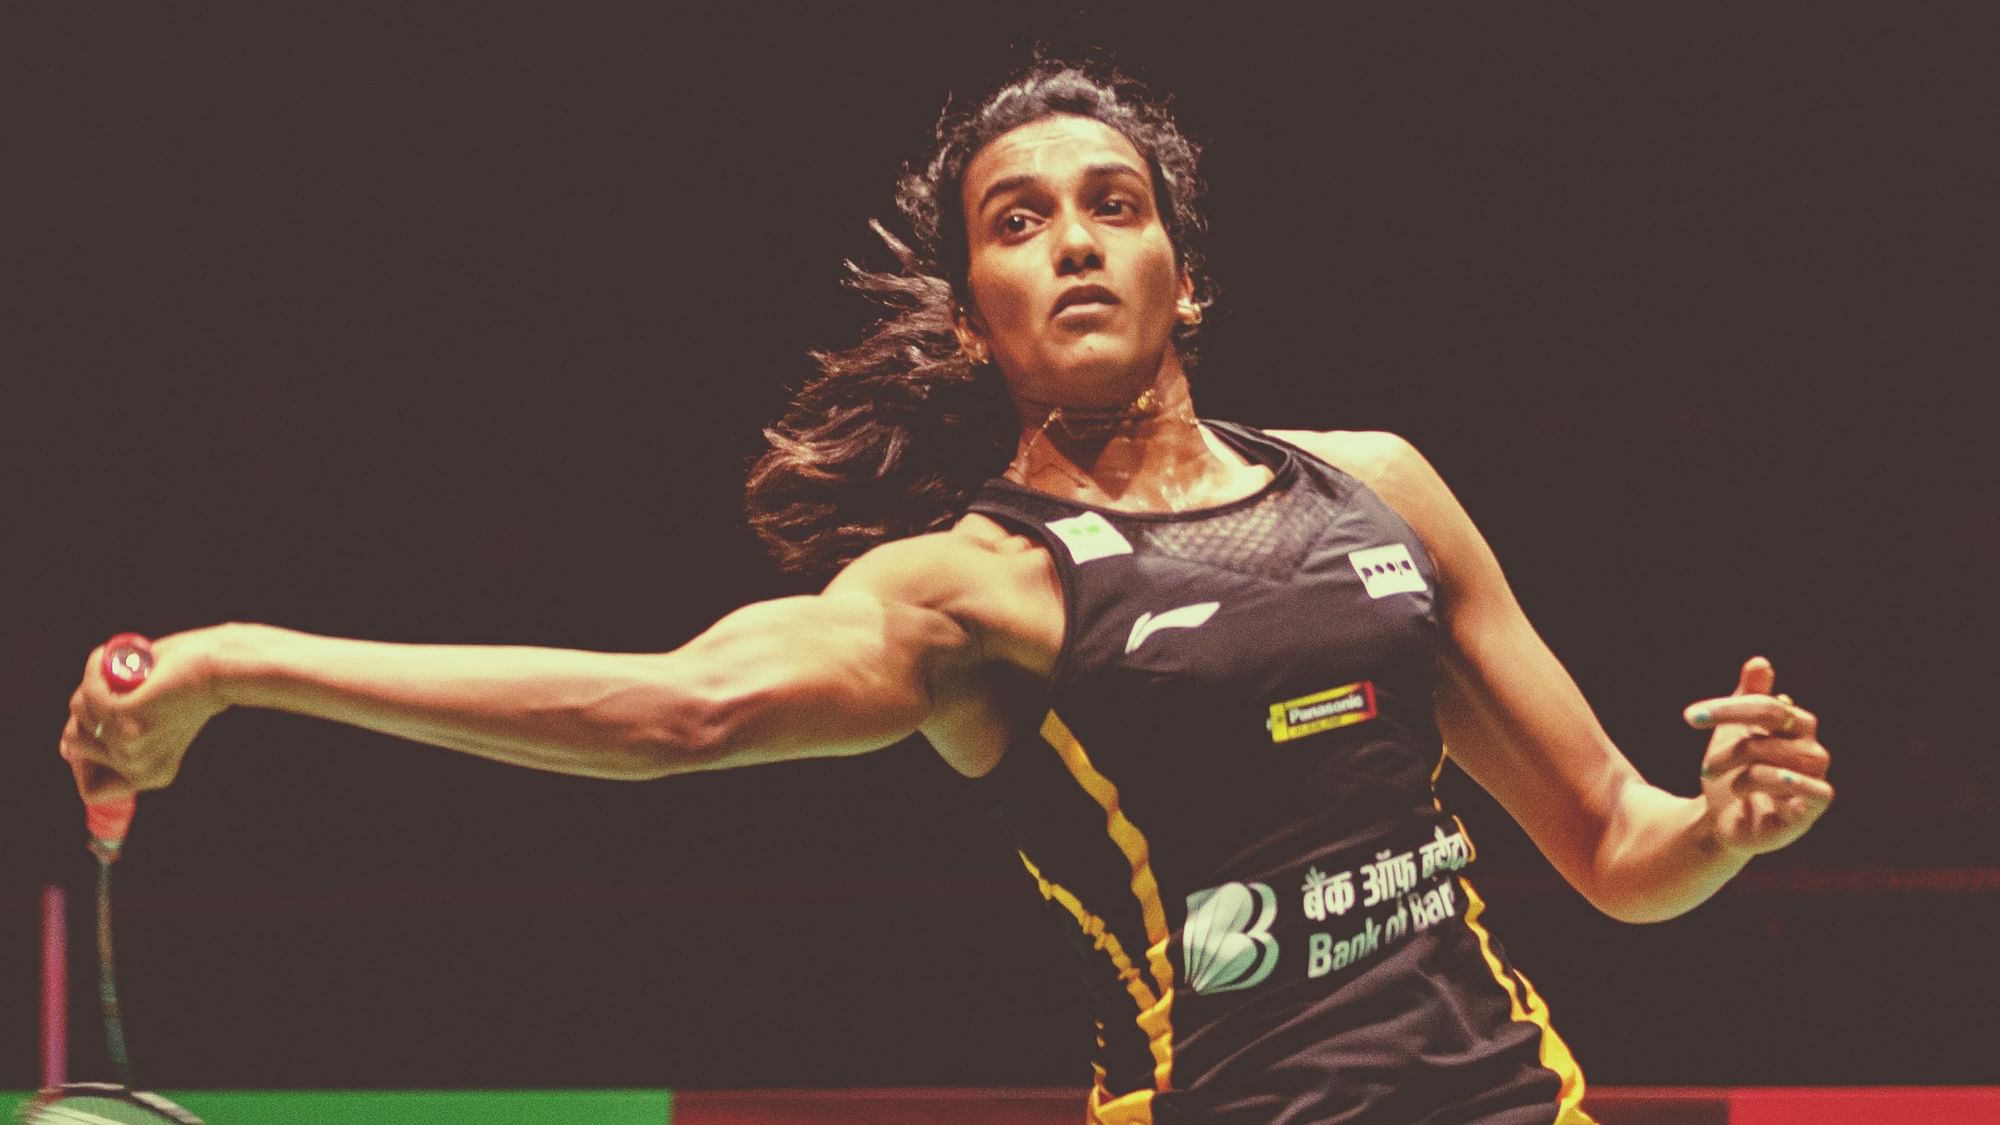 After enduring a poor year by her lofty standards, PV Sindhu rose to the big stage, saving her best for the final act.